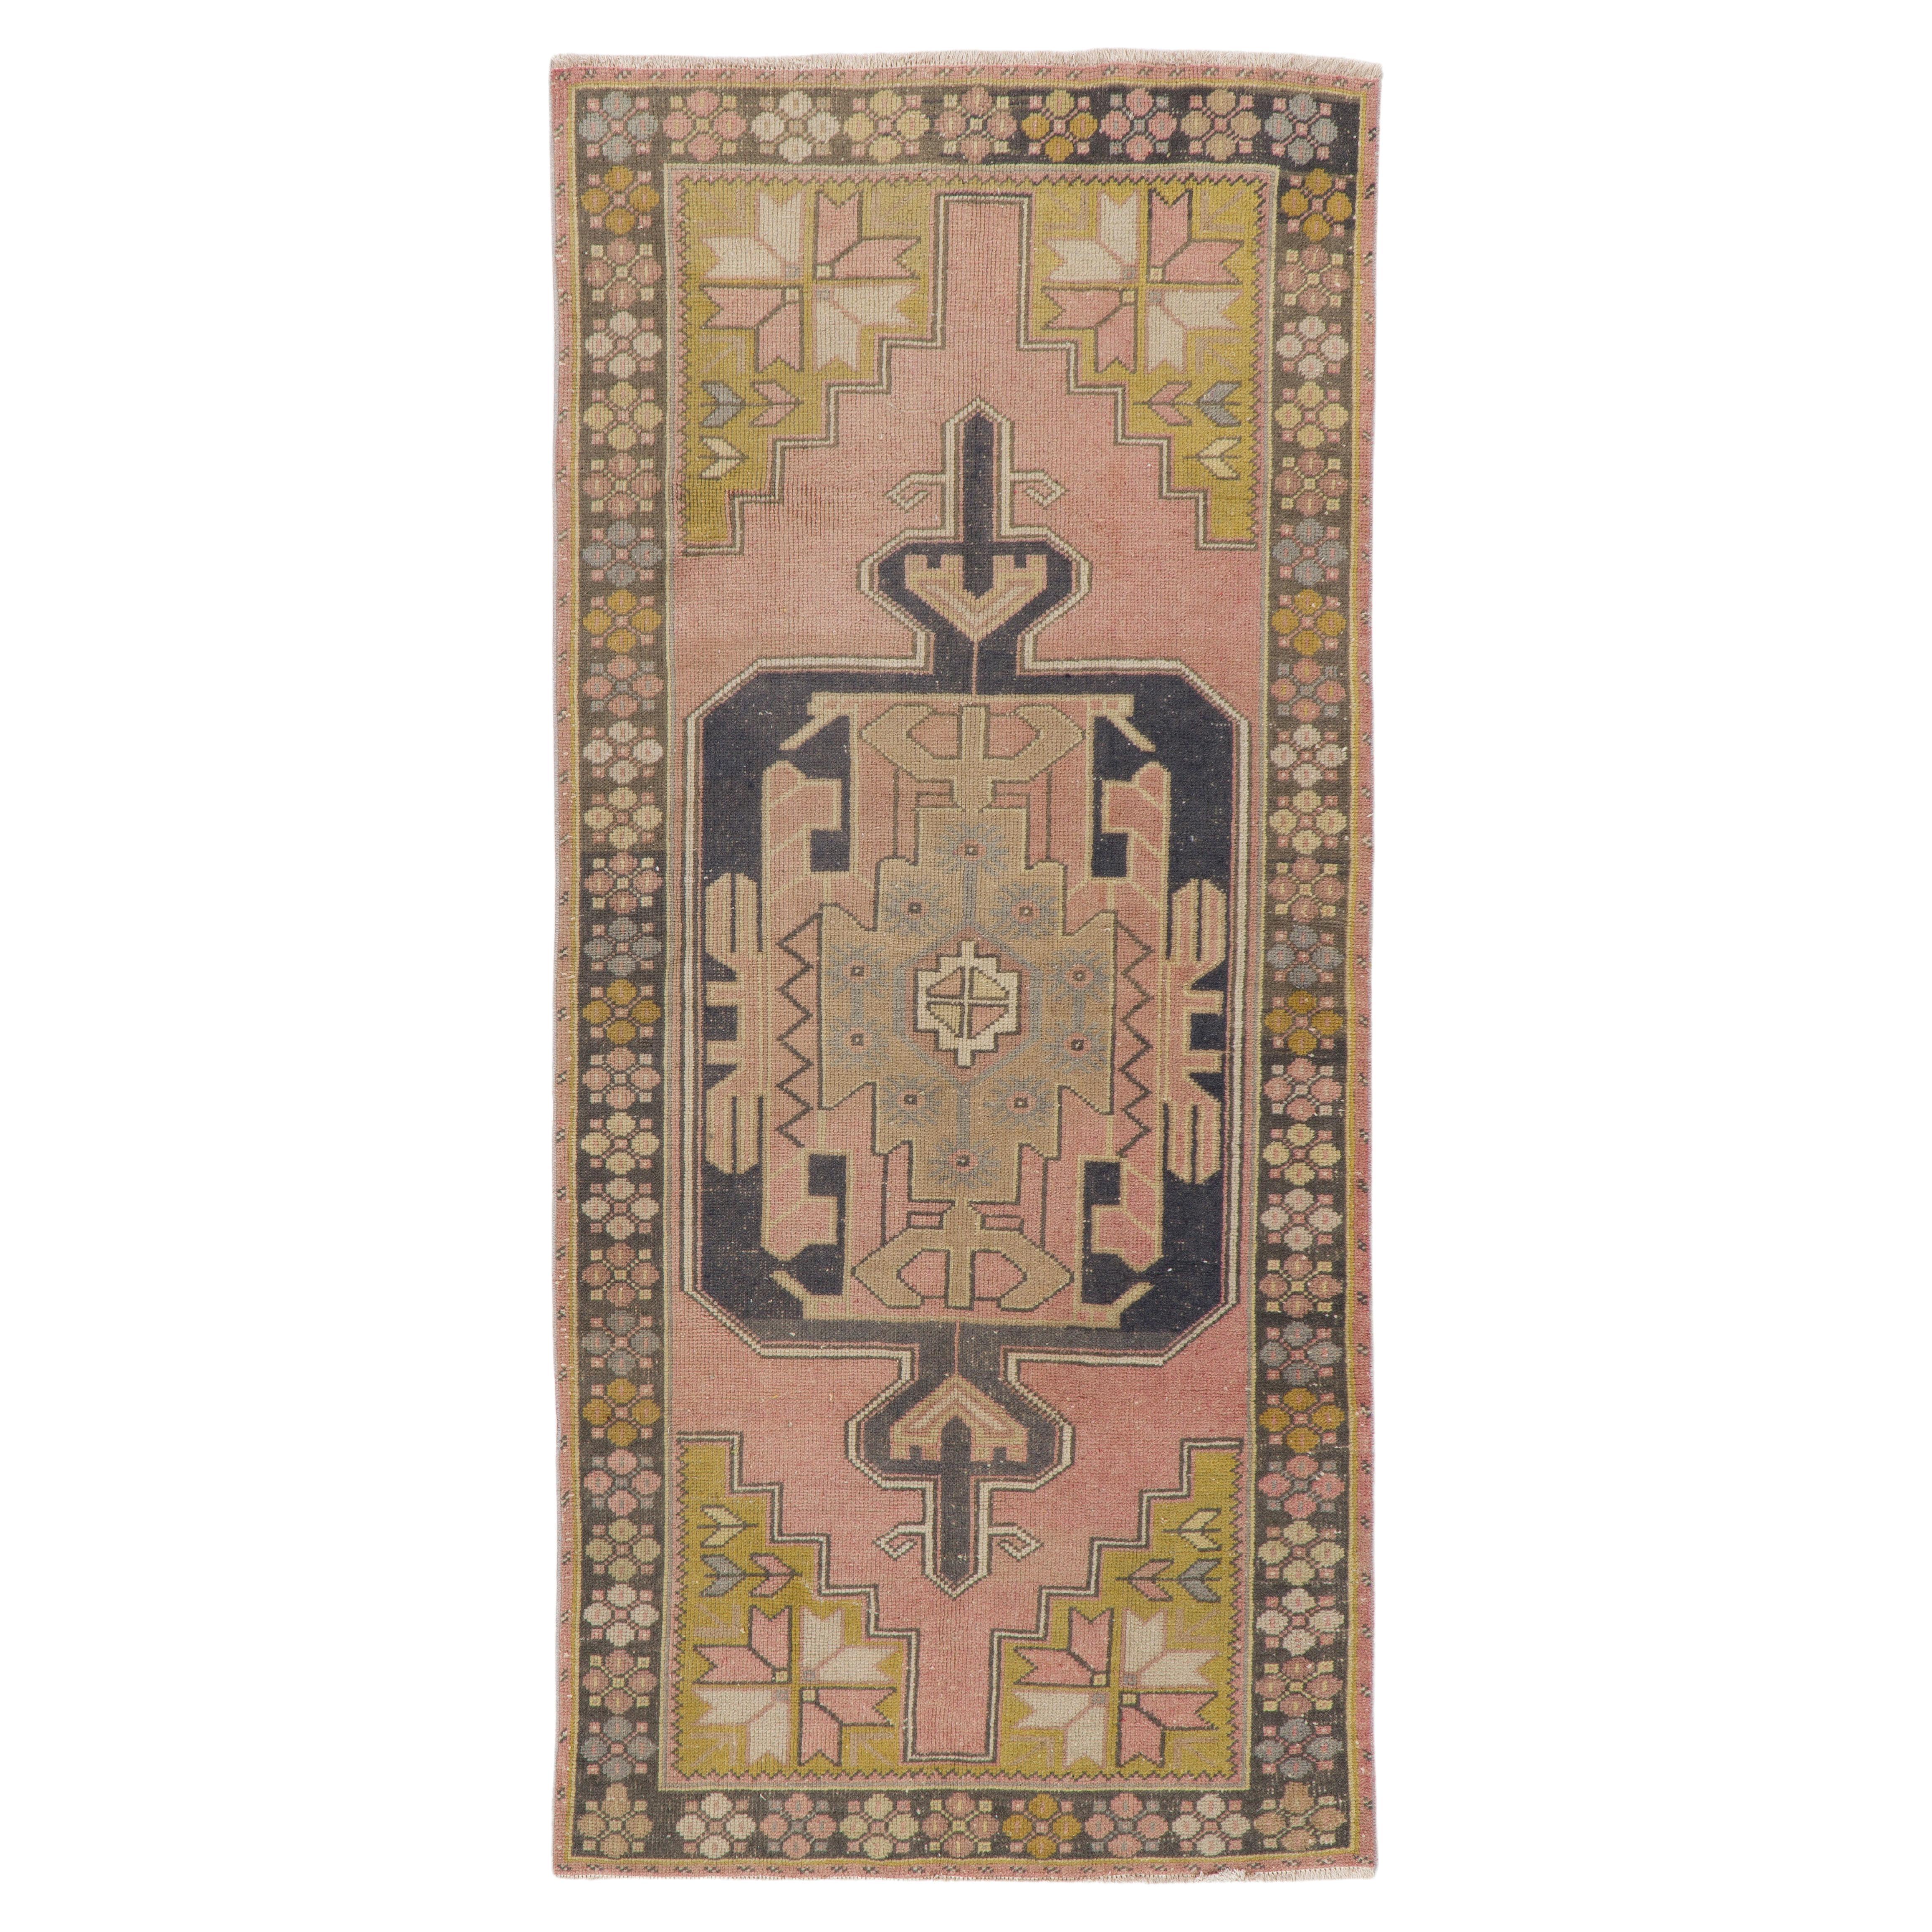 4x8.7 Ft Vintage Hand Knotted Turkish Wool Rug. Authentic 1960s Floor Covering For Sale